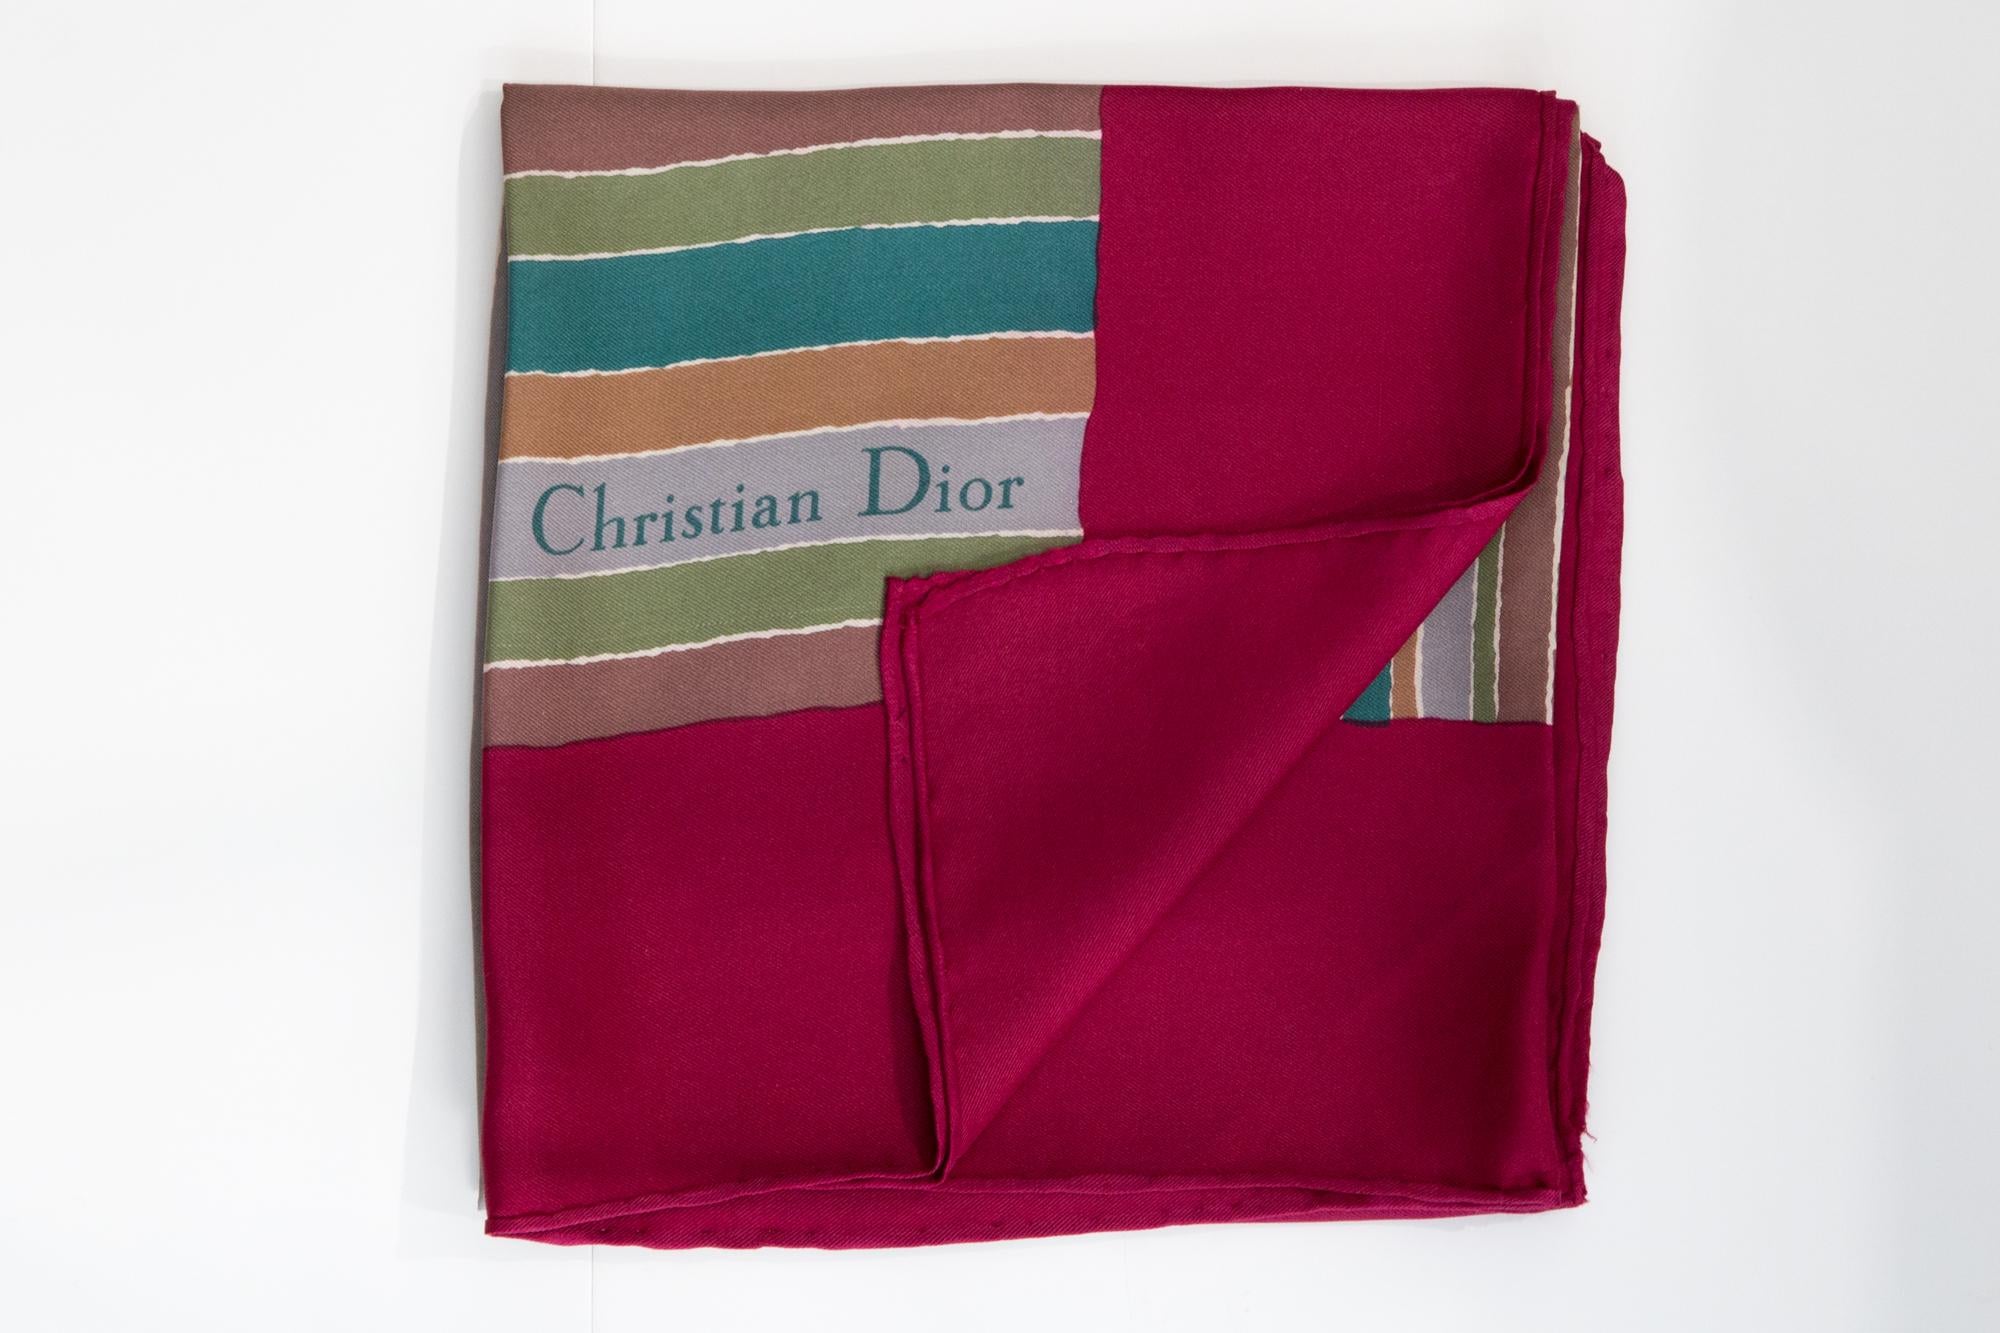 Christian Dior Silk Scarf featuring a red border, a Christian Dior signature. 
Circa 1980s
In good vintage condition. Made in France.
30.7in (78cm)  X 30.7in (78cm)
We guarantee you will receive this  iconic item as described and showed on